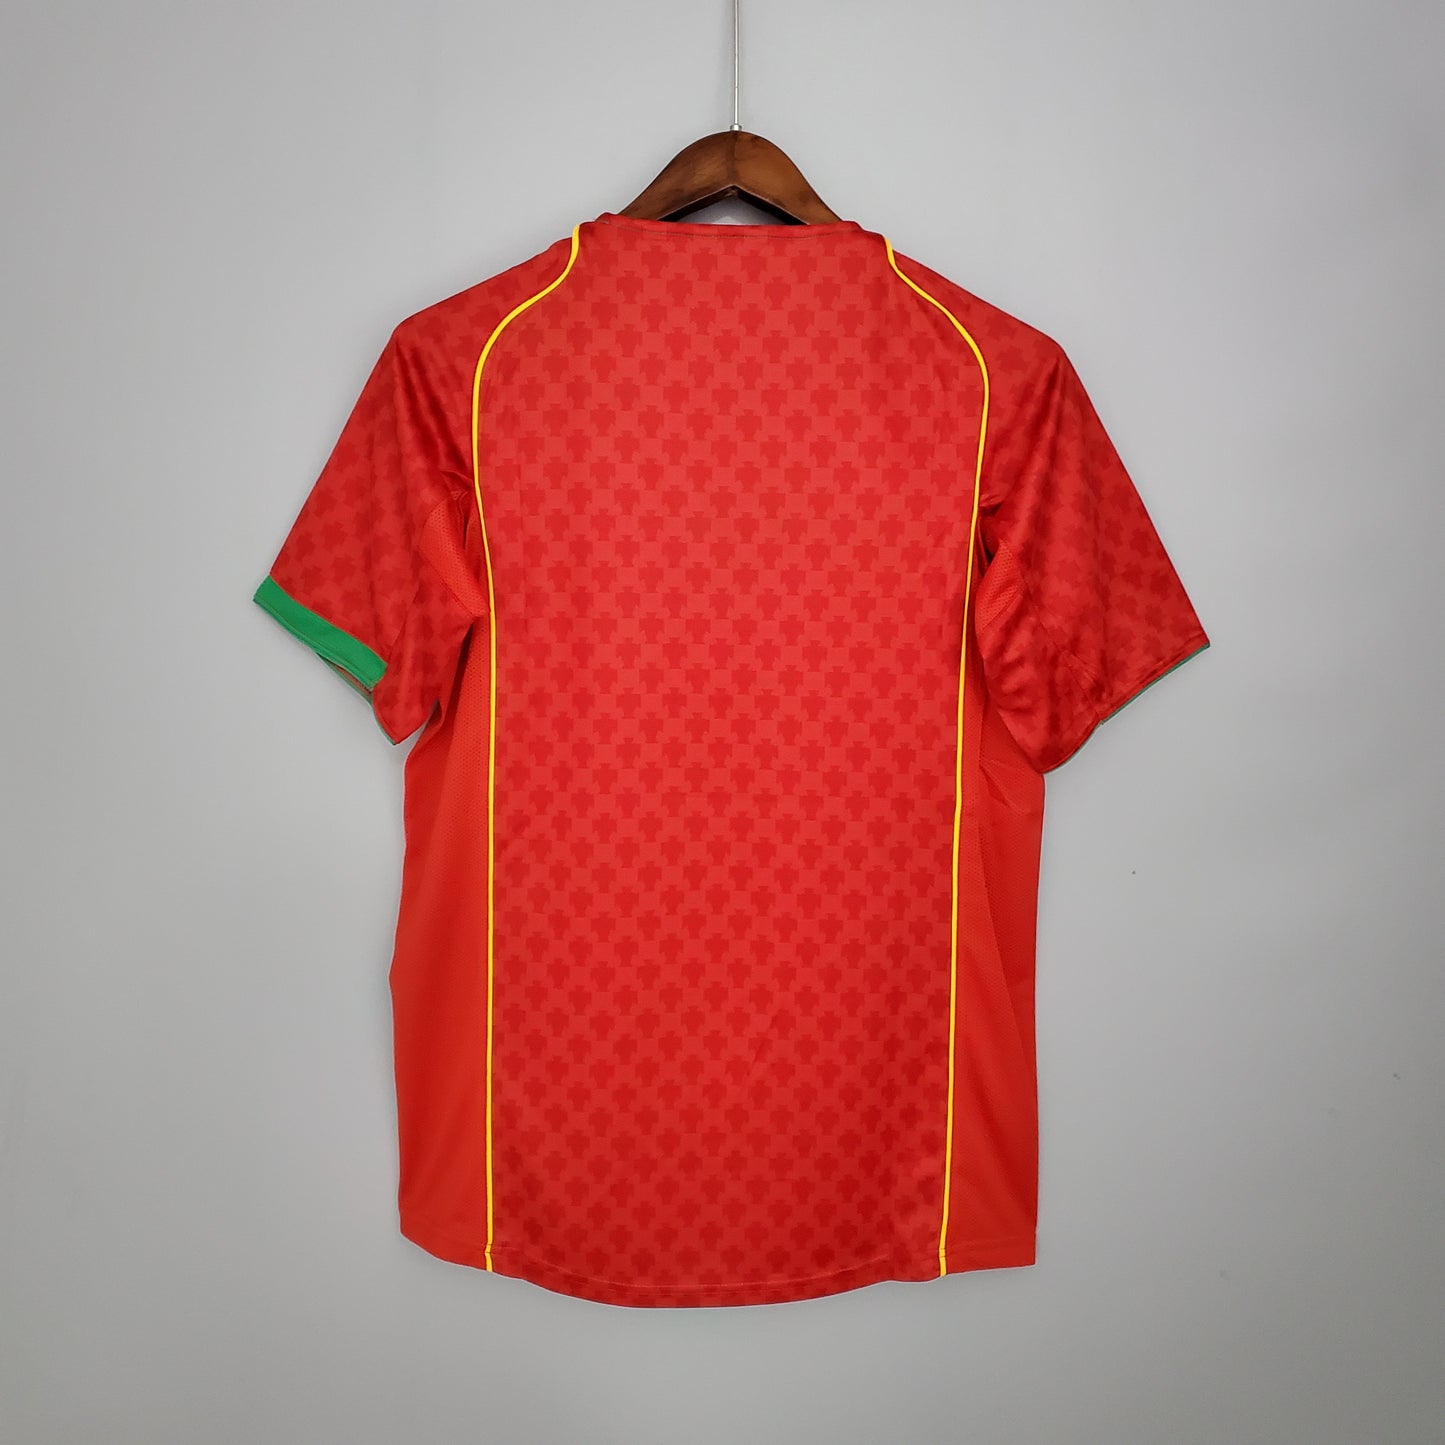 Portugal 2004 Home Jersey - Euro Finals